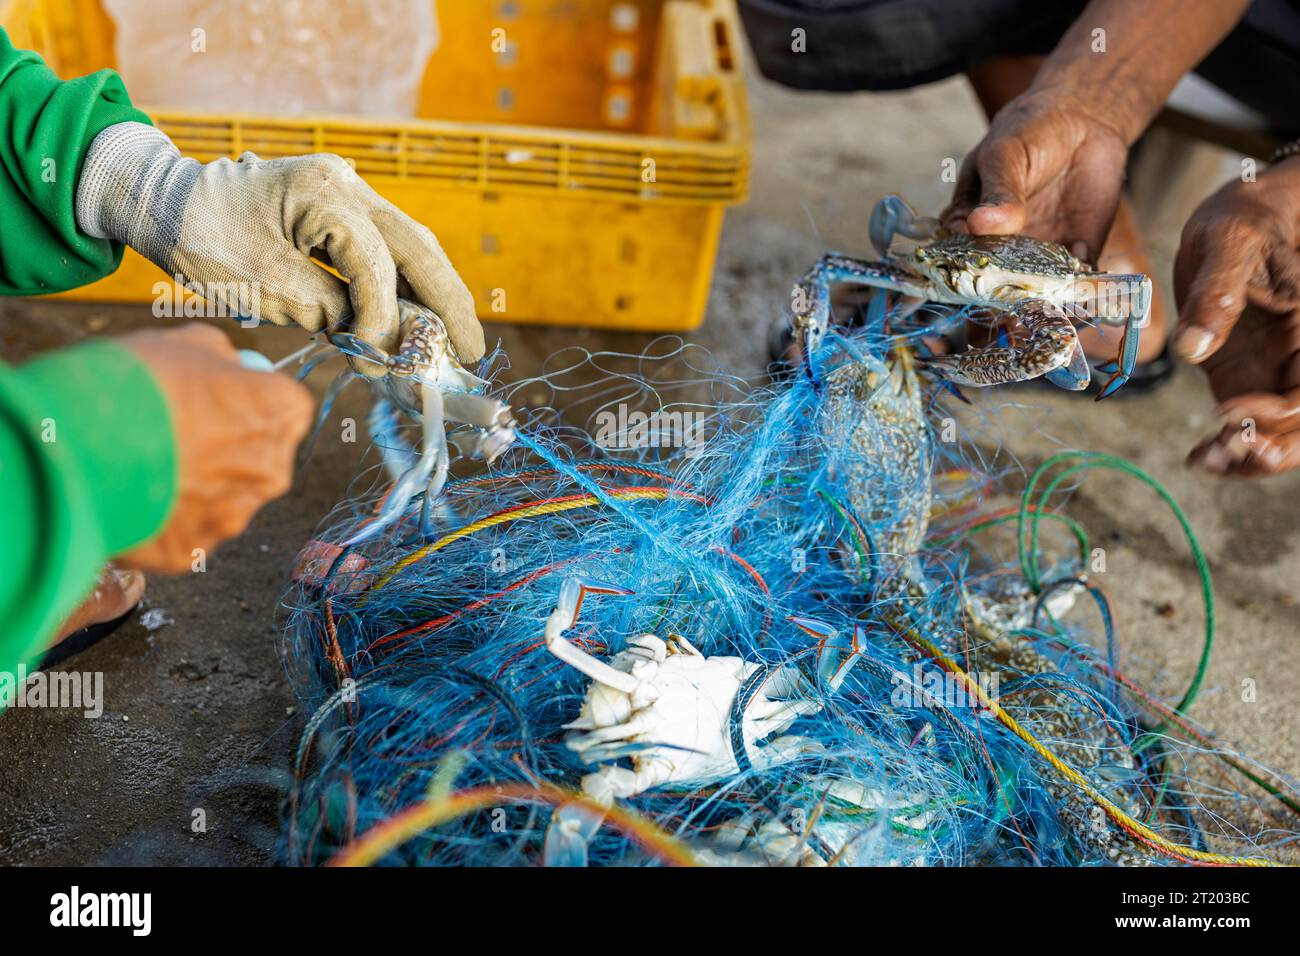 Thailand, Rayong province, Pan Phe: Blue Swimmer Crab fishing. Fishermen  are removing crabs from fishing nets Stock Photo - Alamy